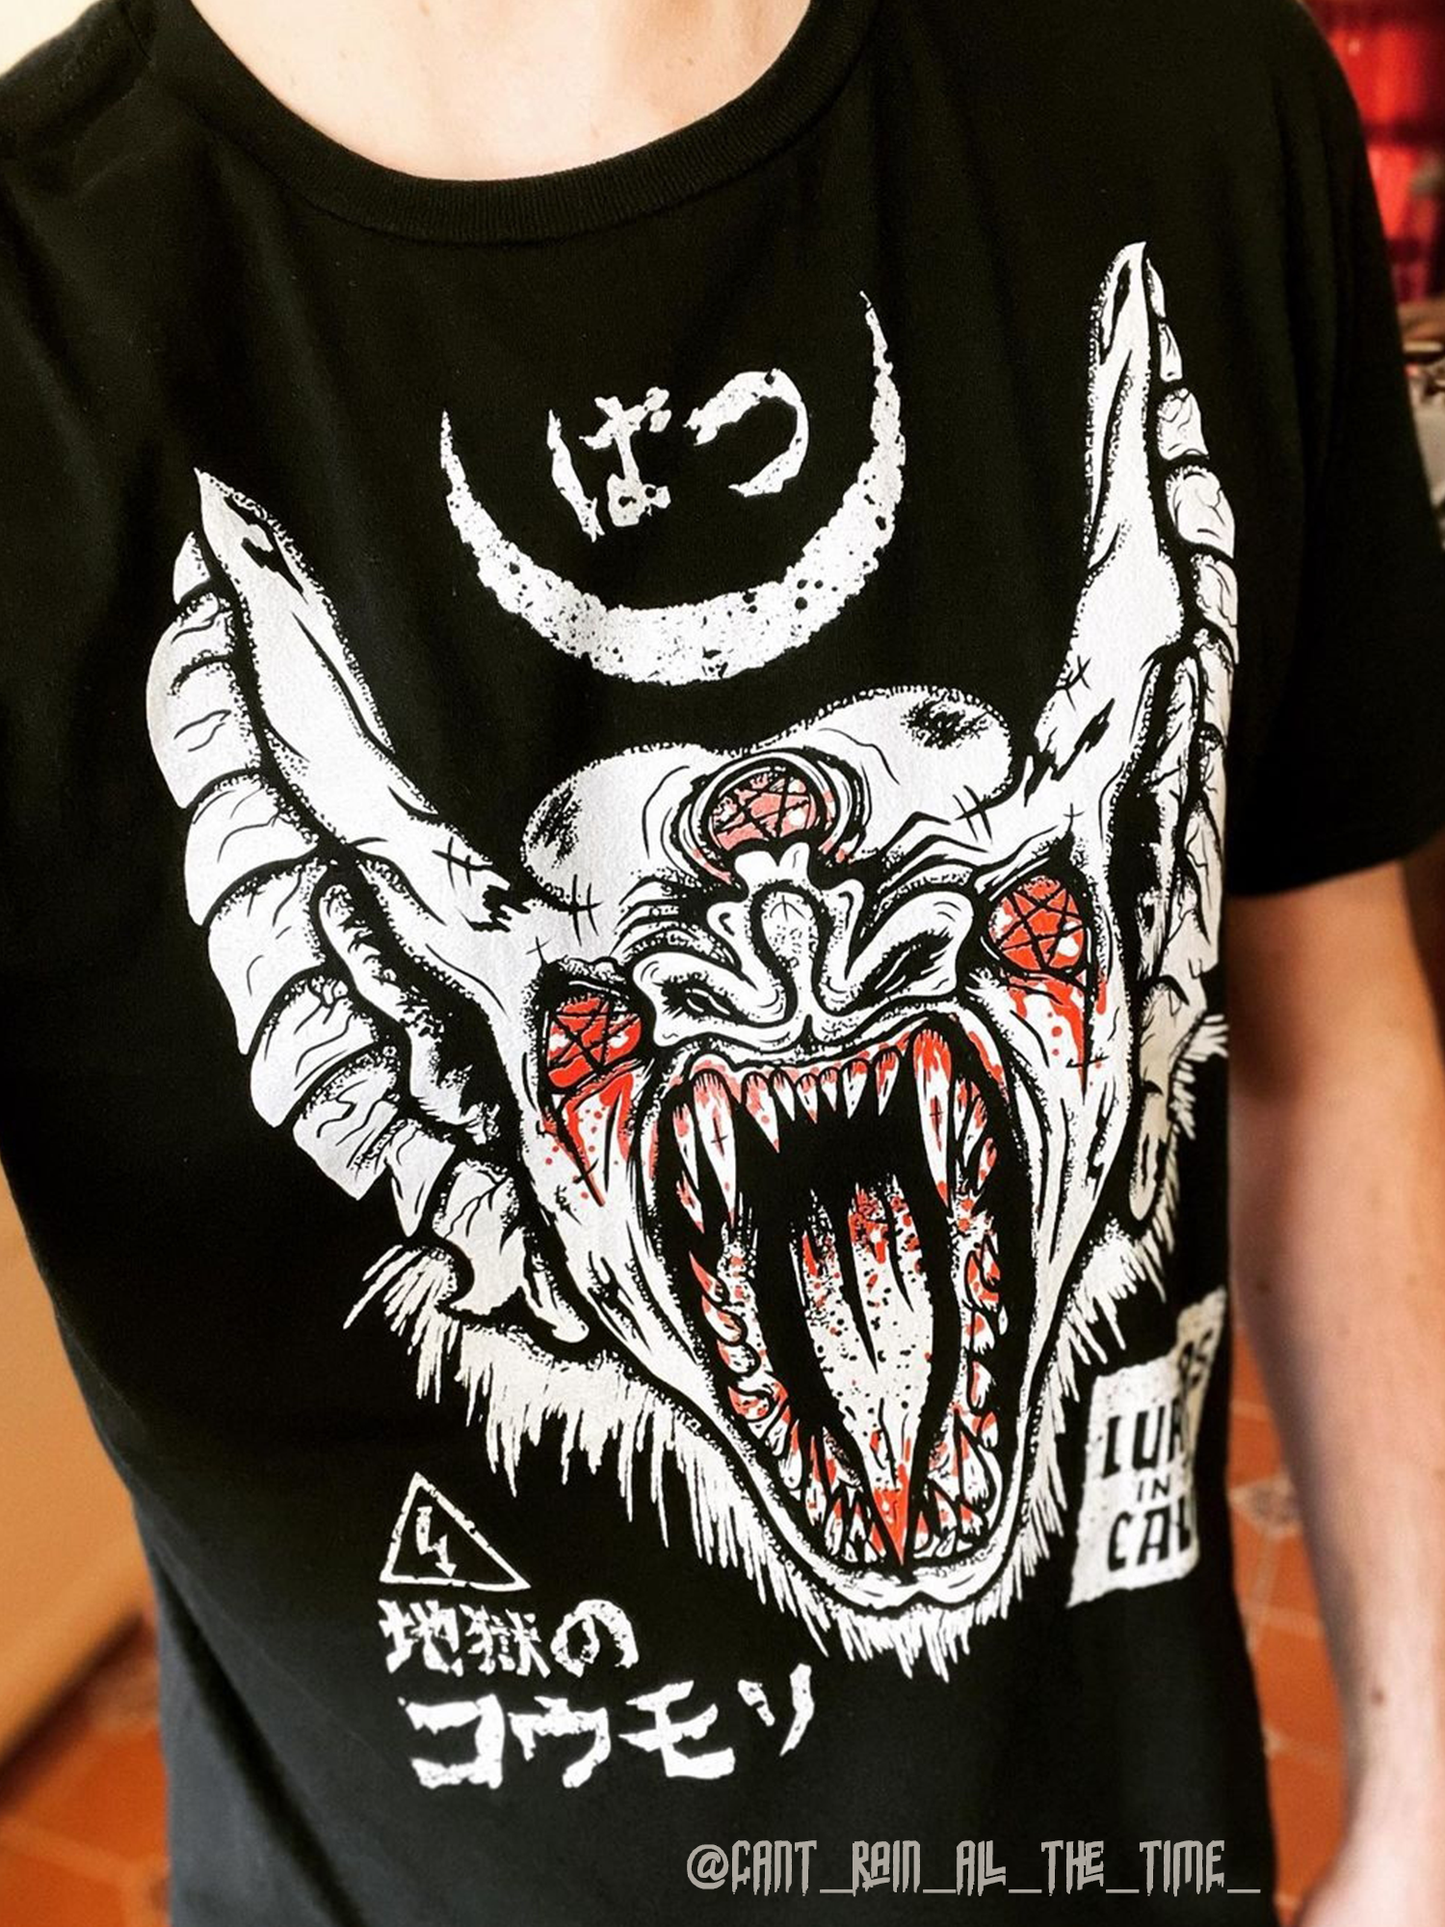 The Lurkers in the Caves T-shirt